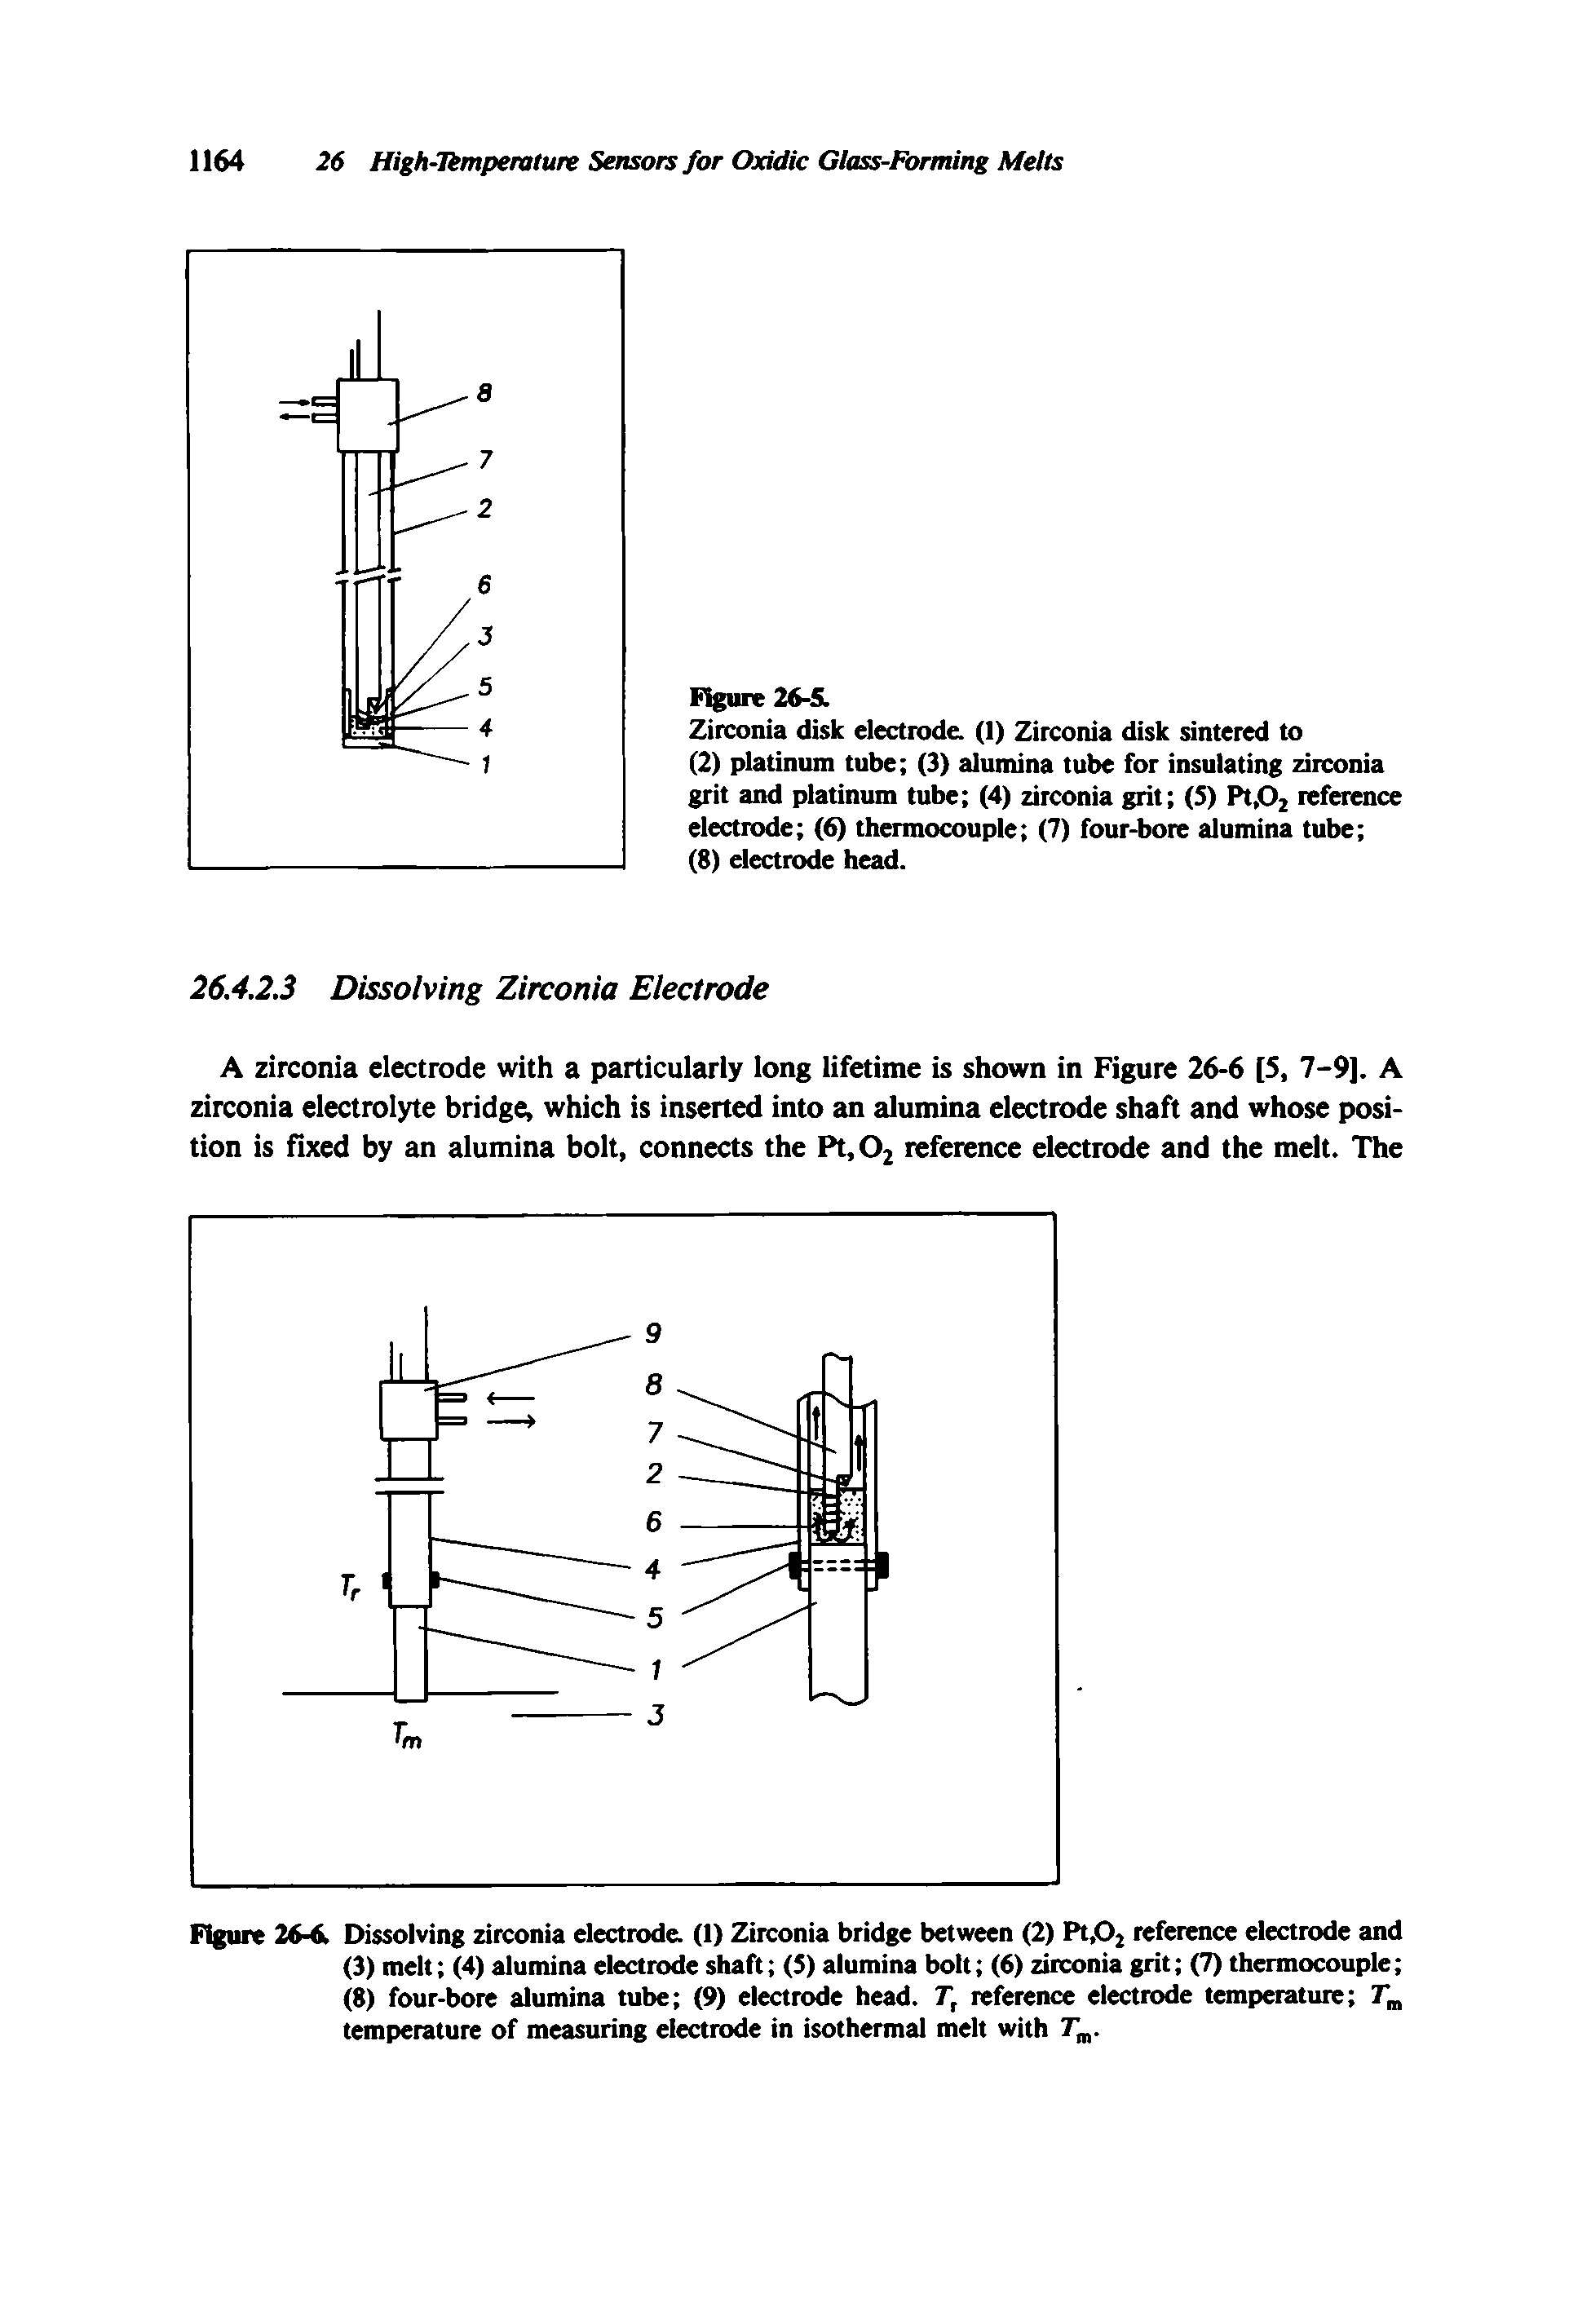 Figure 2/6-6. Dissolving zirconia electrode. (1) Zirconia bridge between (2) Pt,02 reference electrode and (3) melt (4) alumina electrode shaft (5) alumina bolt (6) zirconia grit (7) thermocouple (8) four-bore alumina tube (9) electrode head. T, reference electrode temperature temperature of measuring electrode in isothermal melt with T, .